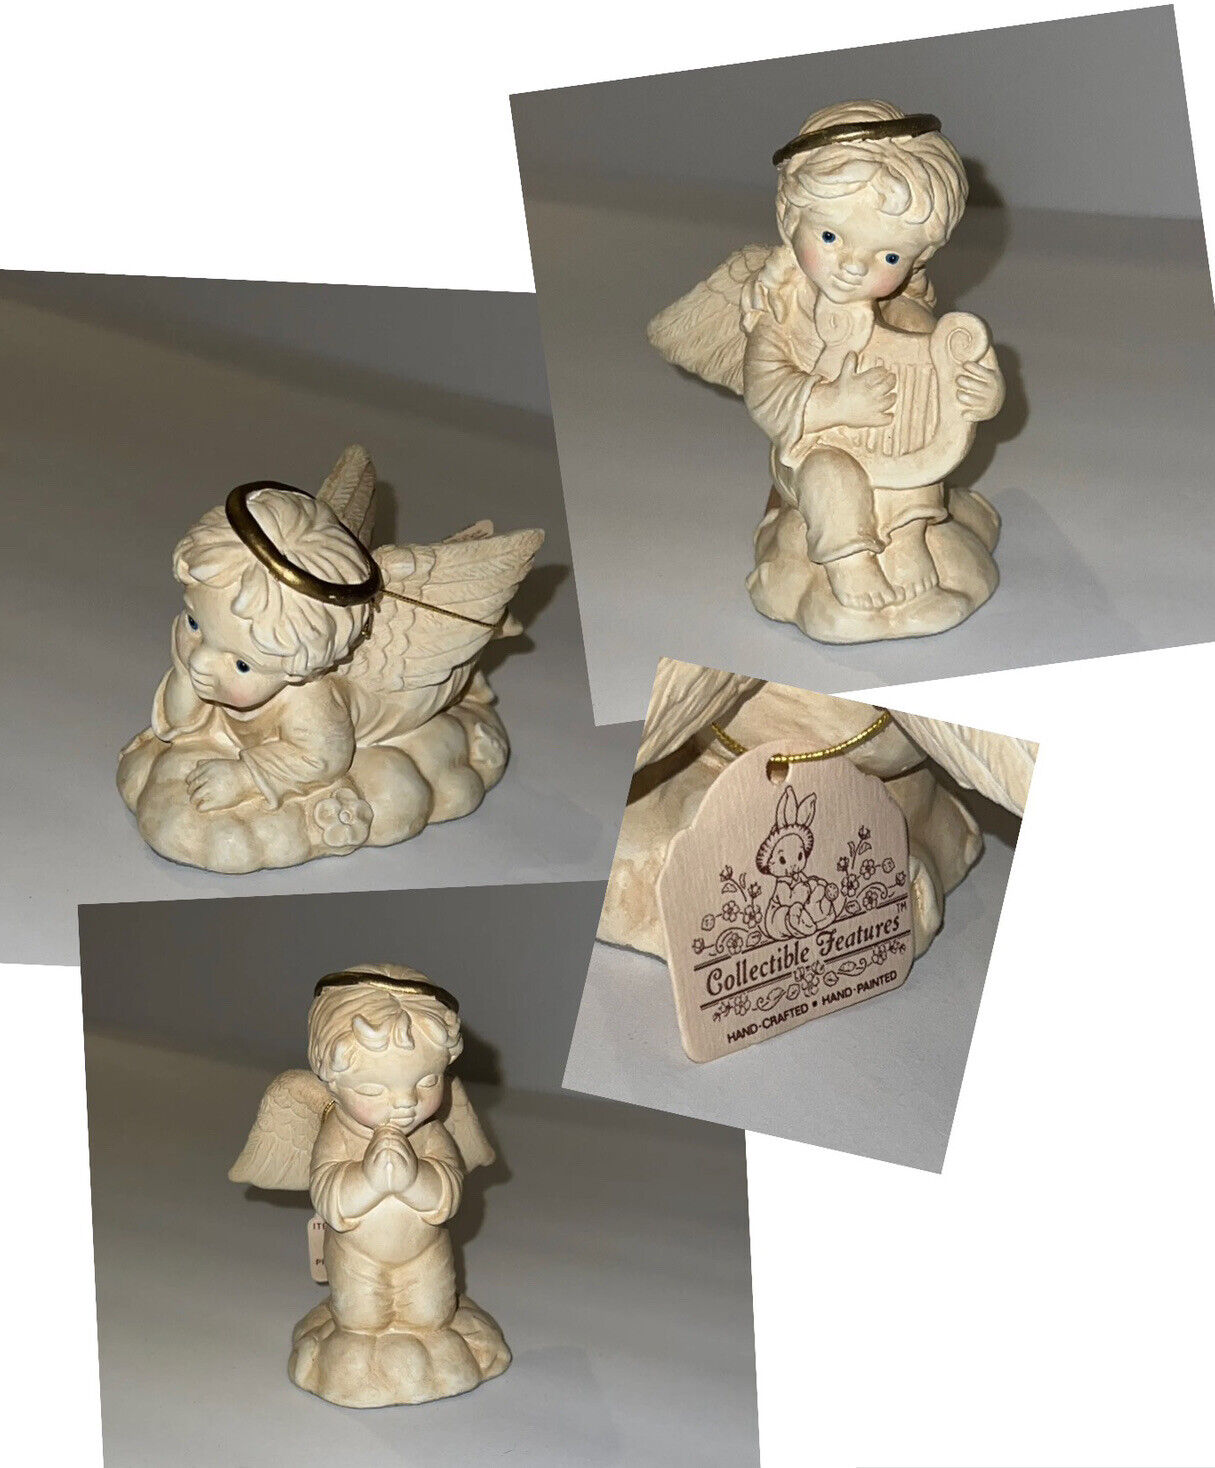 Lot Of 3 Handcrafted And Hand-painted Ceramic Praying Angels 4 inches